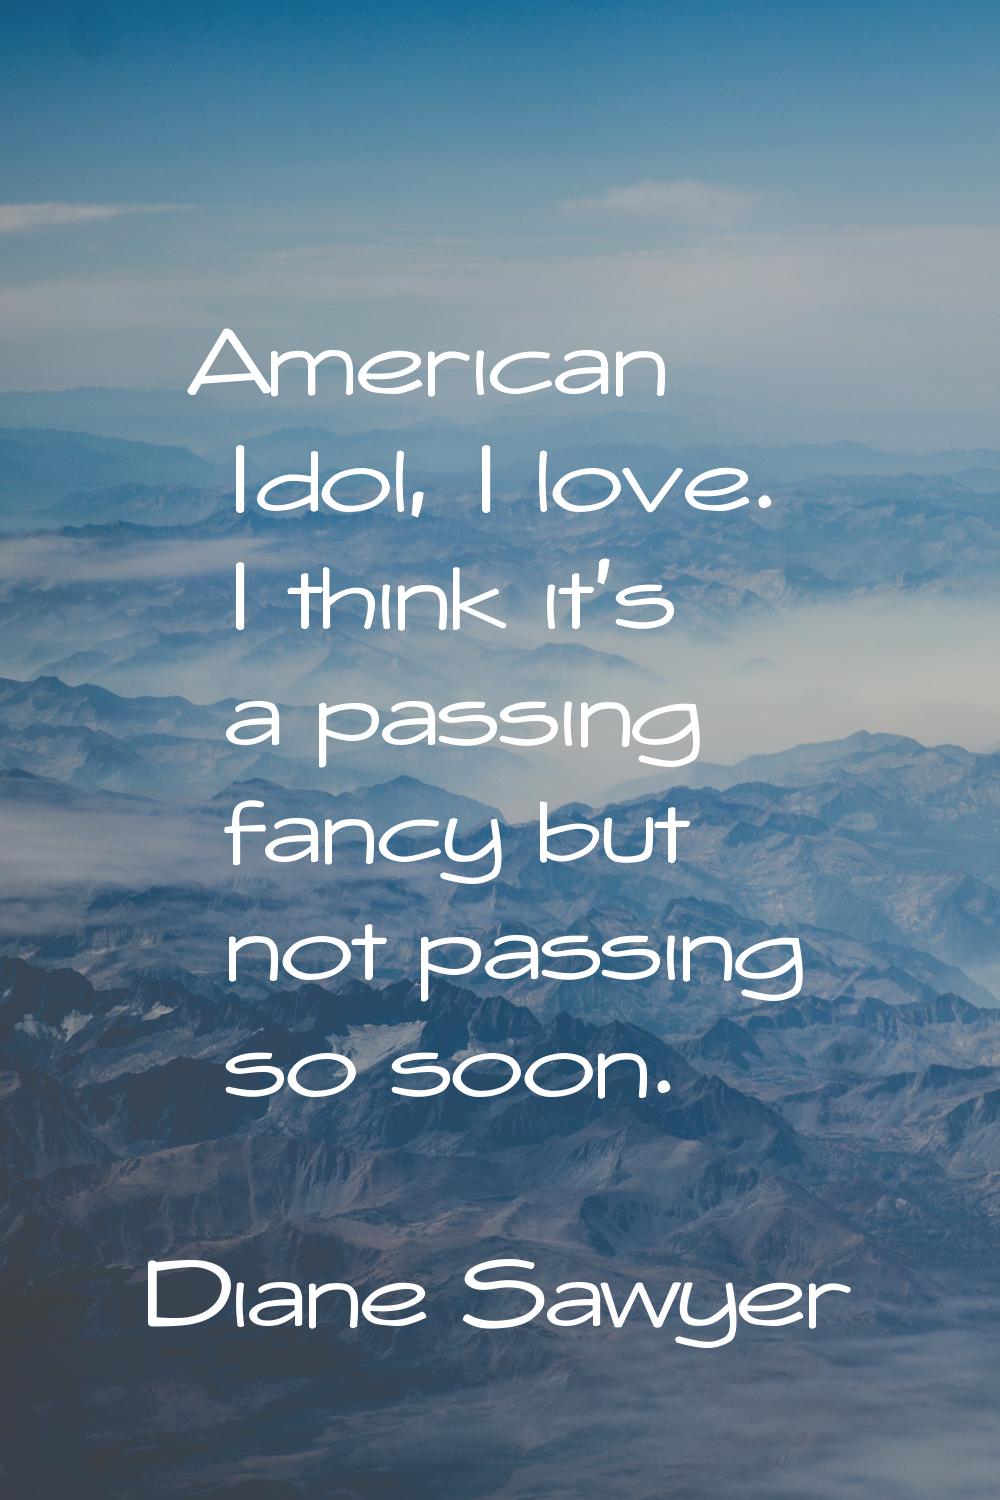 American Idol, I love. I think it's a passing fancy but not passing so soon.